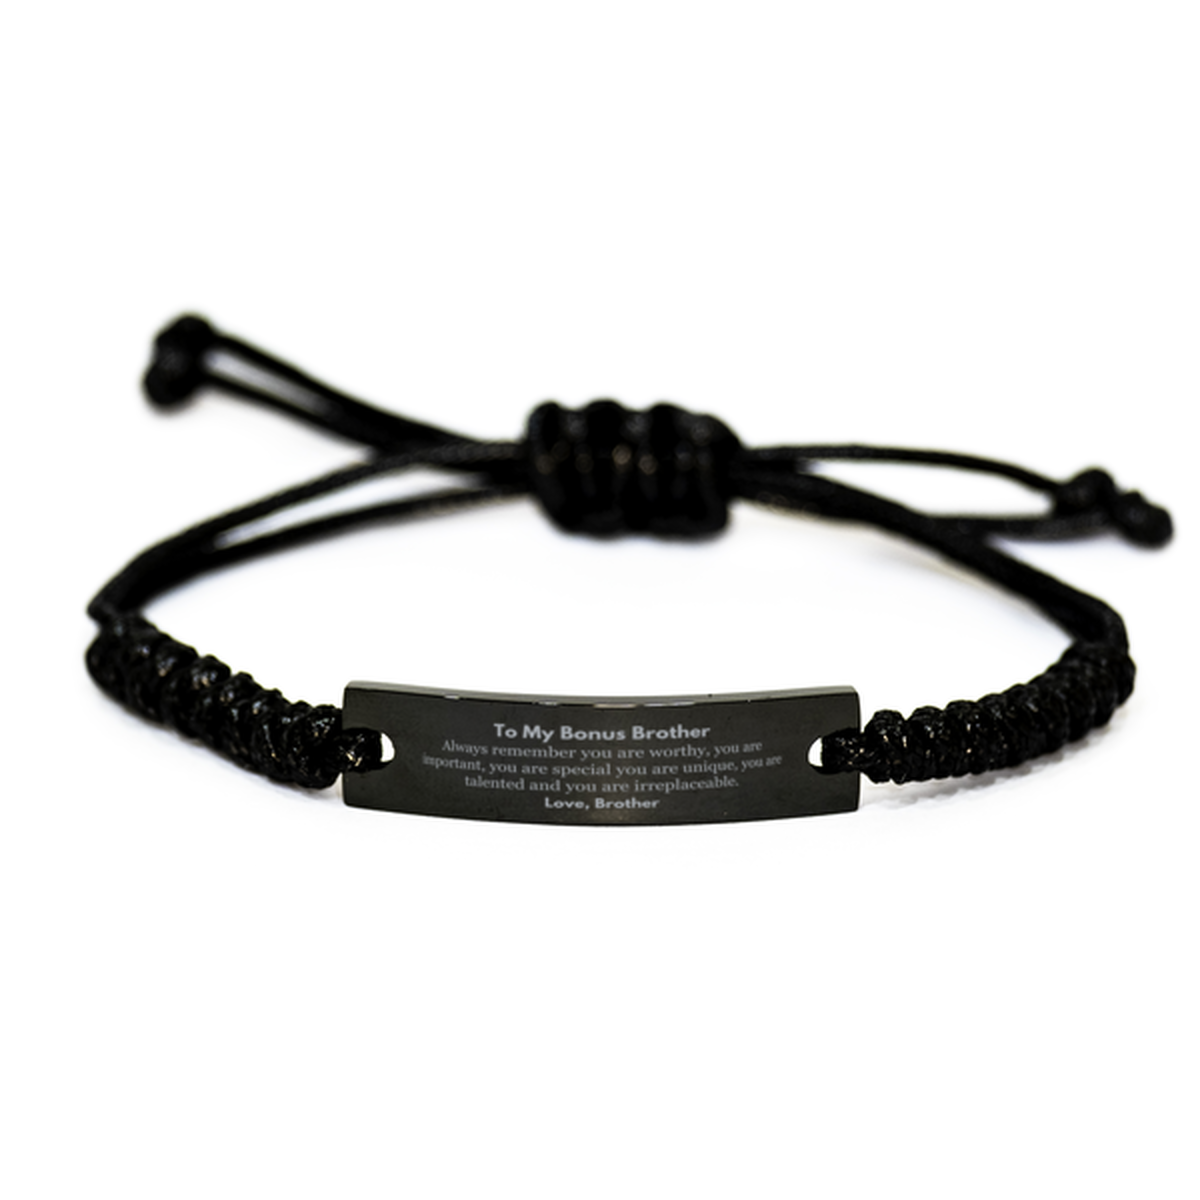 Bonus Brother Birthday Gifts from Brother, Inspirational Black Rope Bracelet for Bonus Brother Christmas Graduation Gifts for Bonus Brother Always remember you are worthy, you are important. Love, Brother